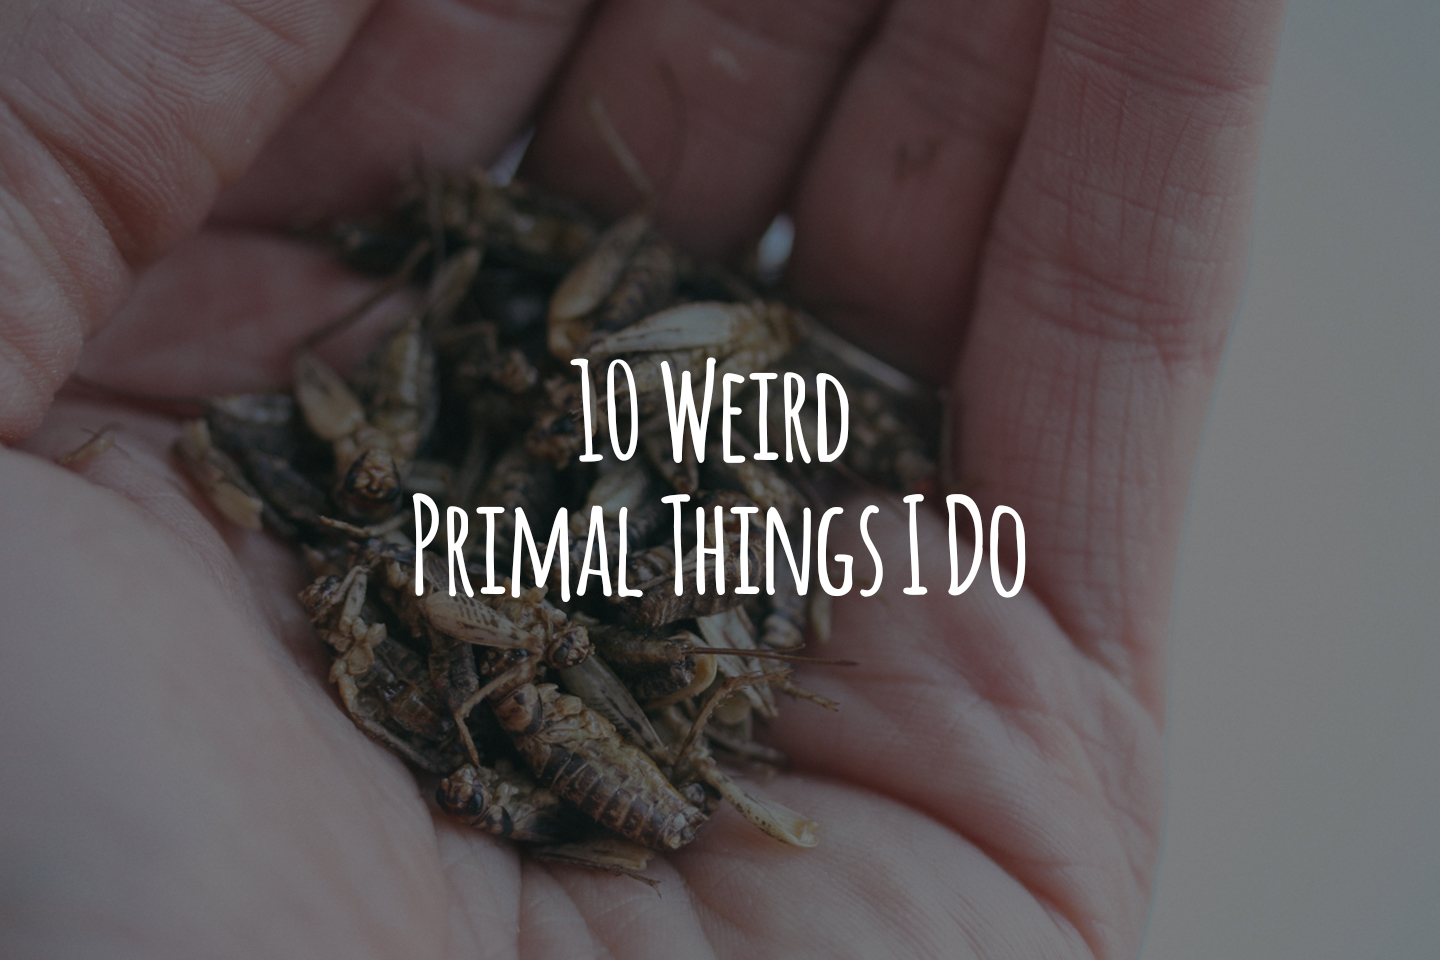 10 Weird Primal Things I Do